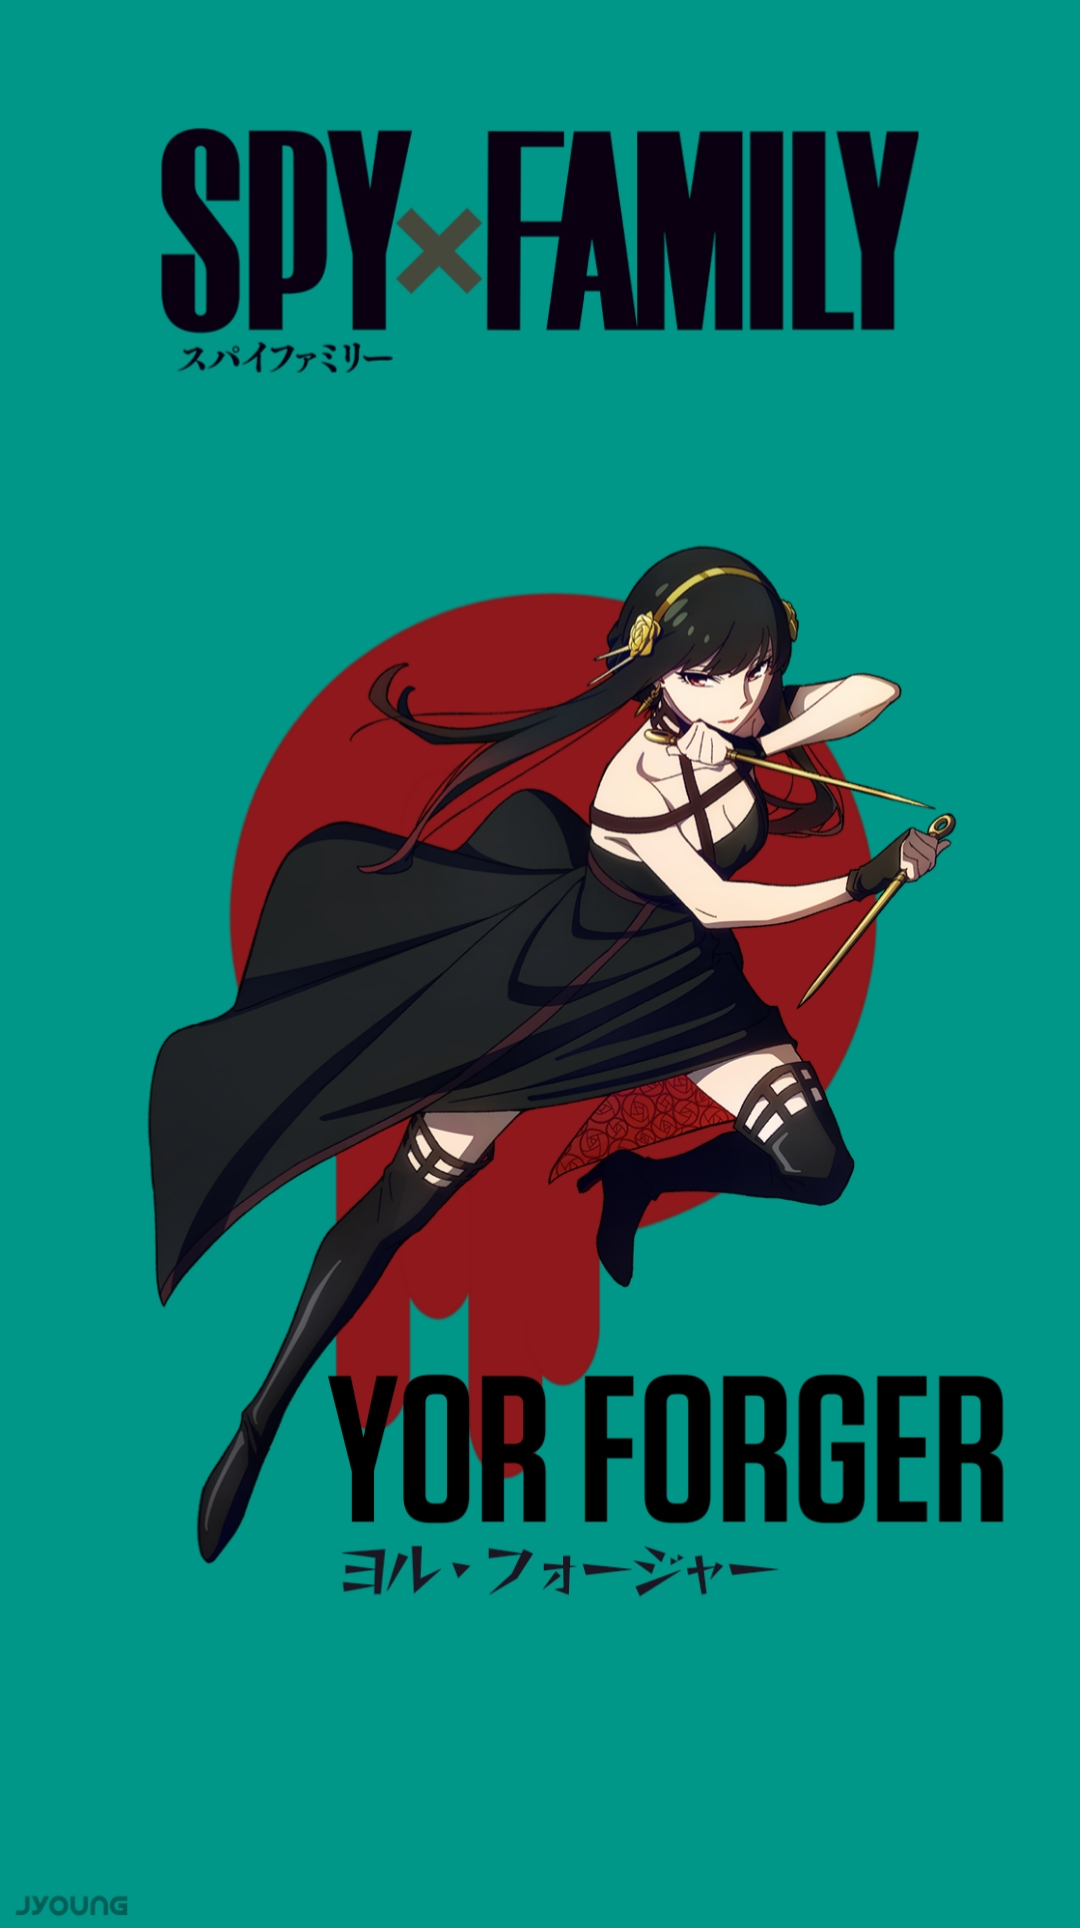 Wallpaper ID 343786  Anime Spy x Family Phone Wallpaper Yor Forger  1170x2532 free download